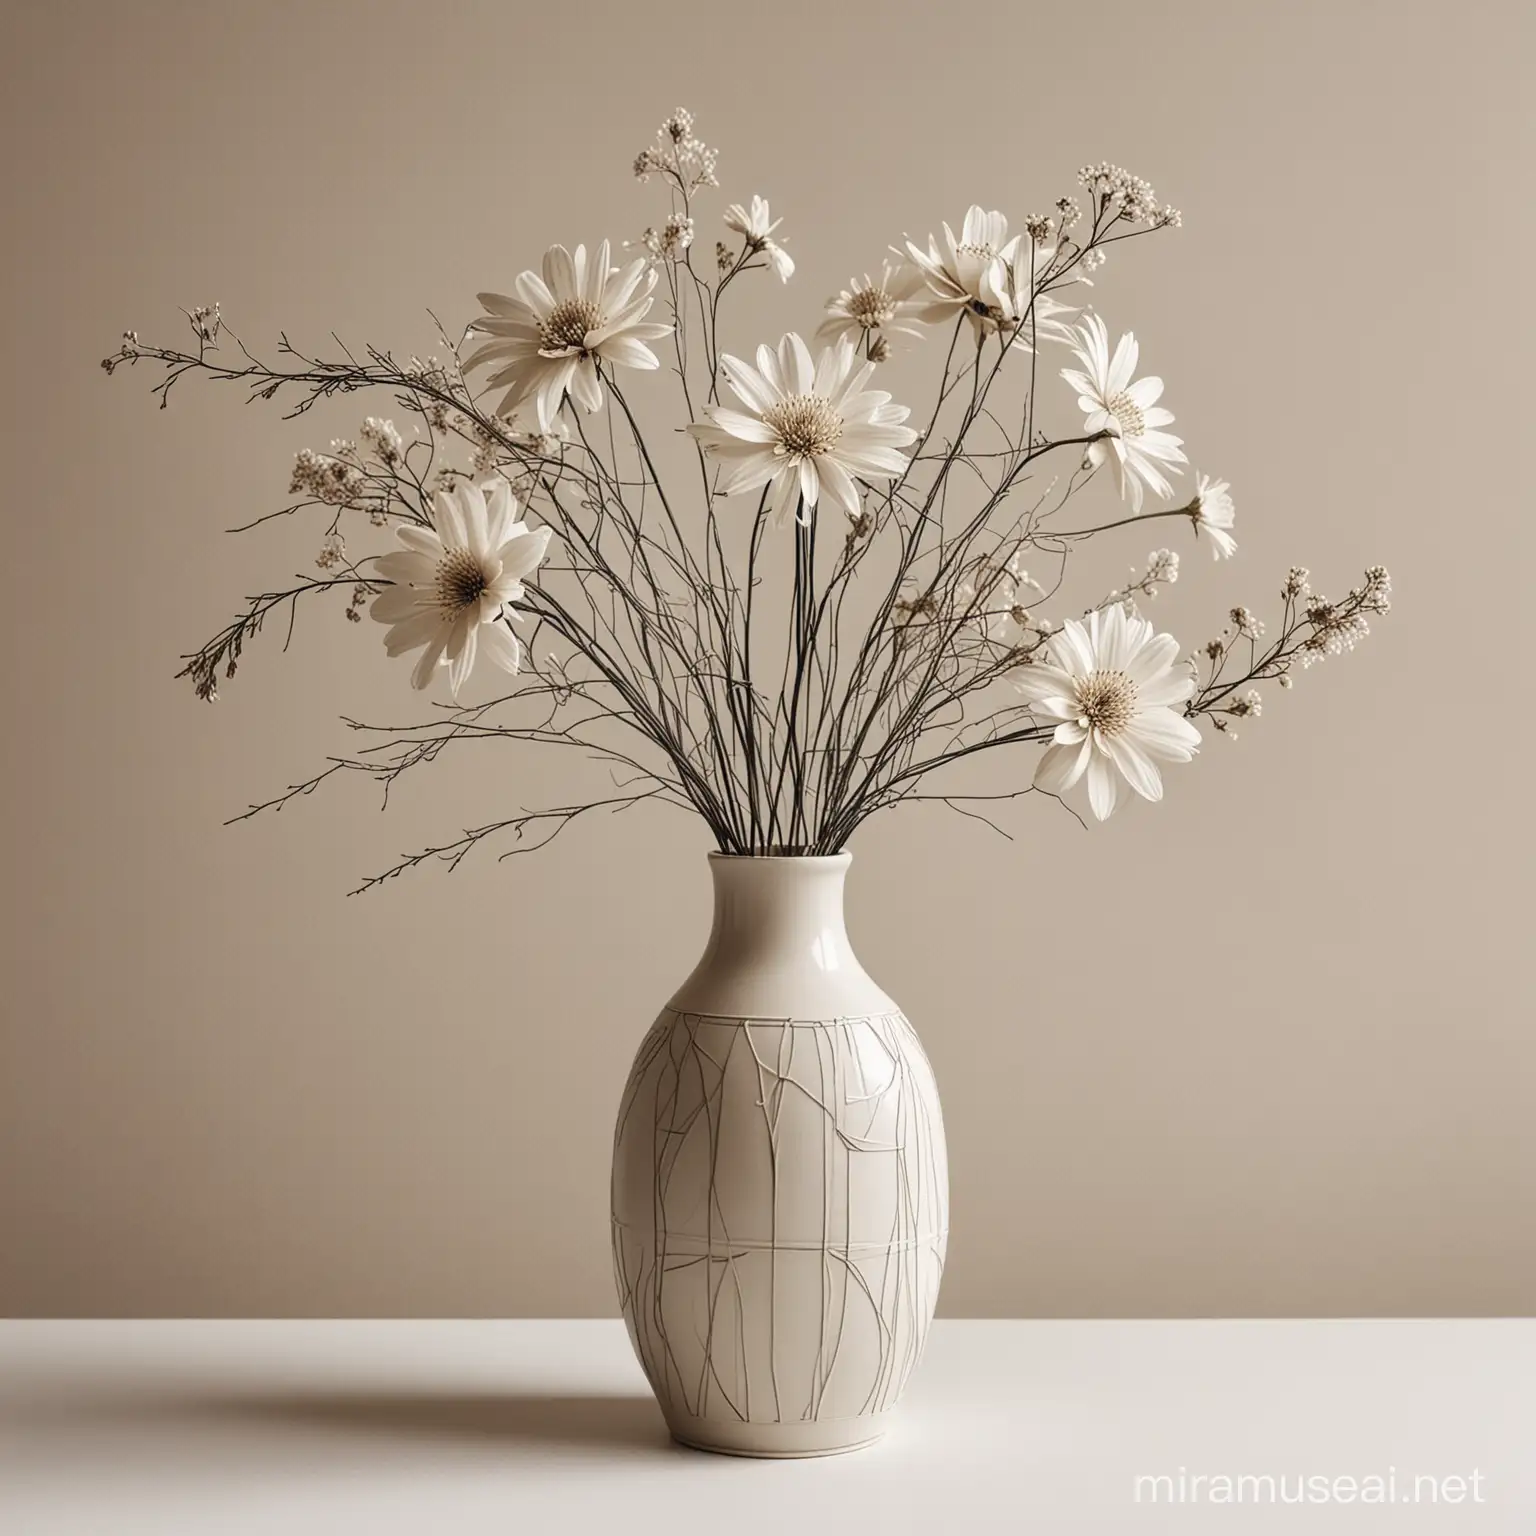 A vase of uncolored flowers with minimalist lines